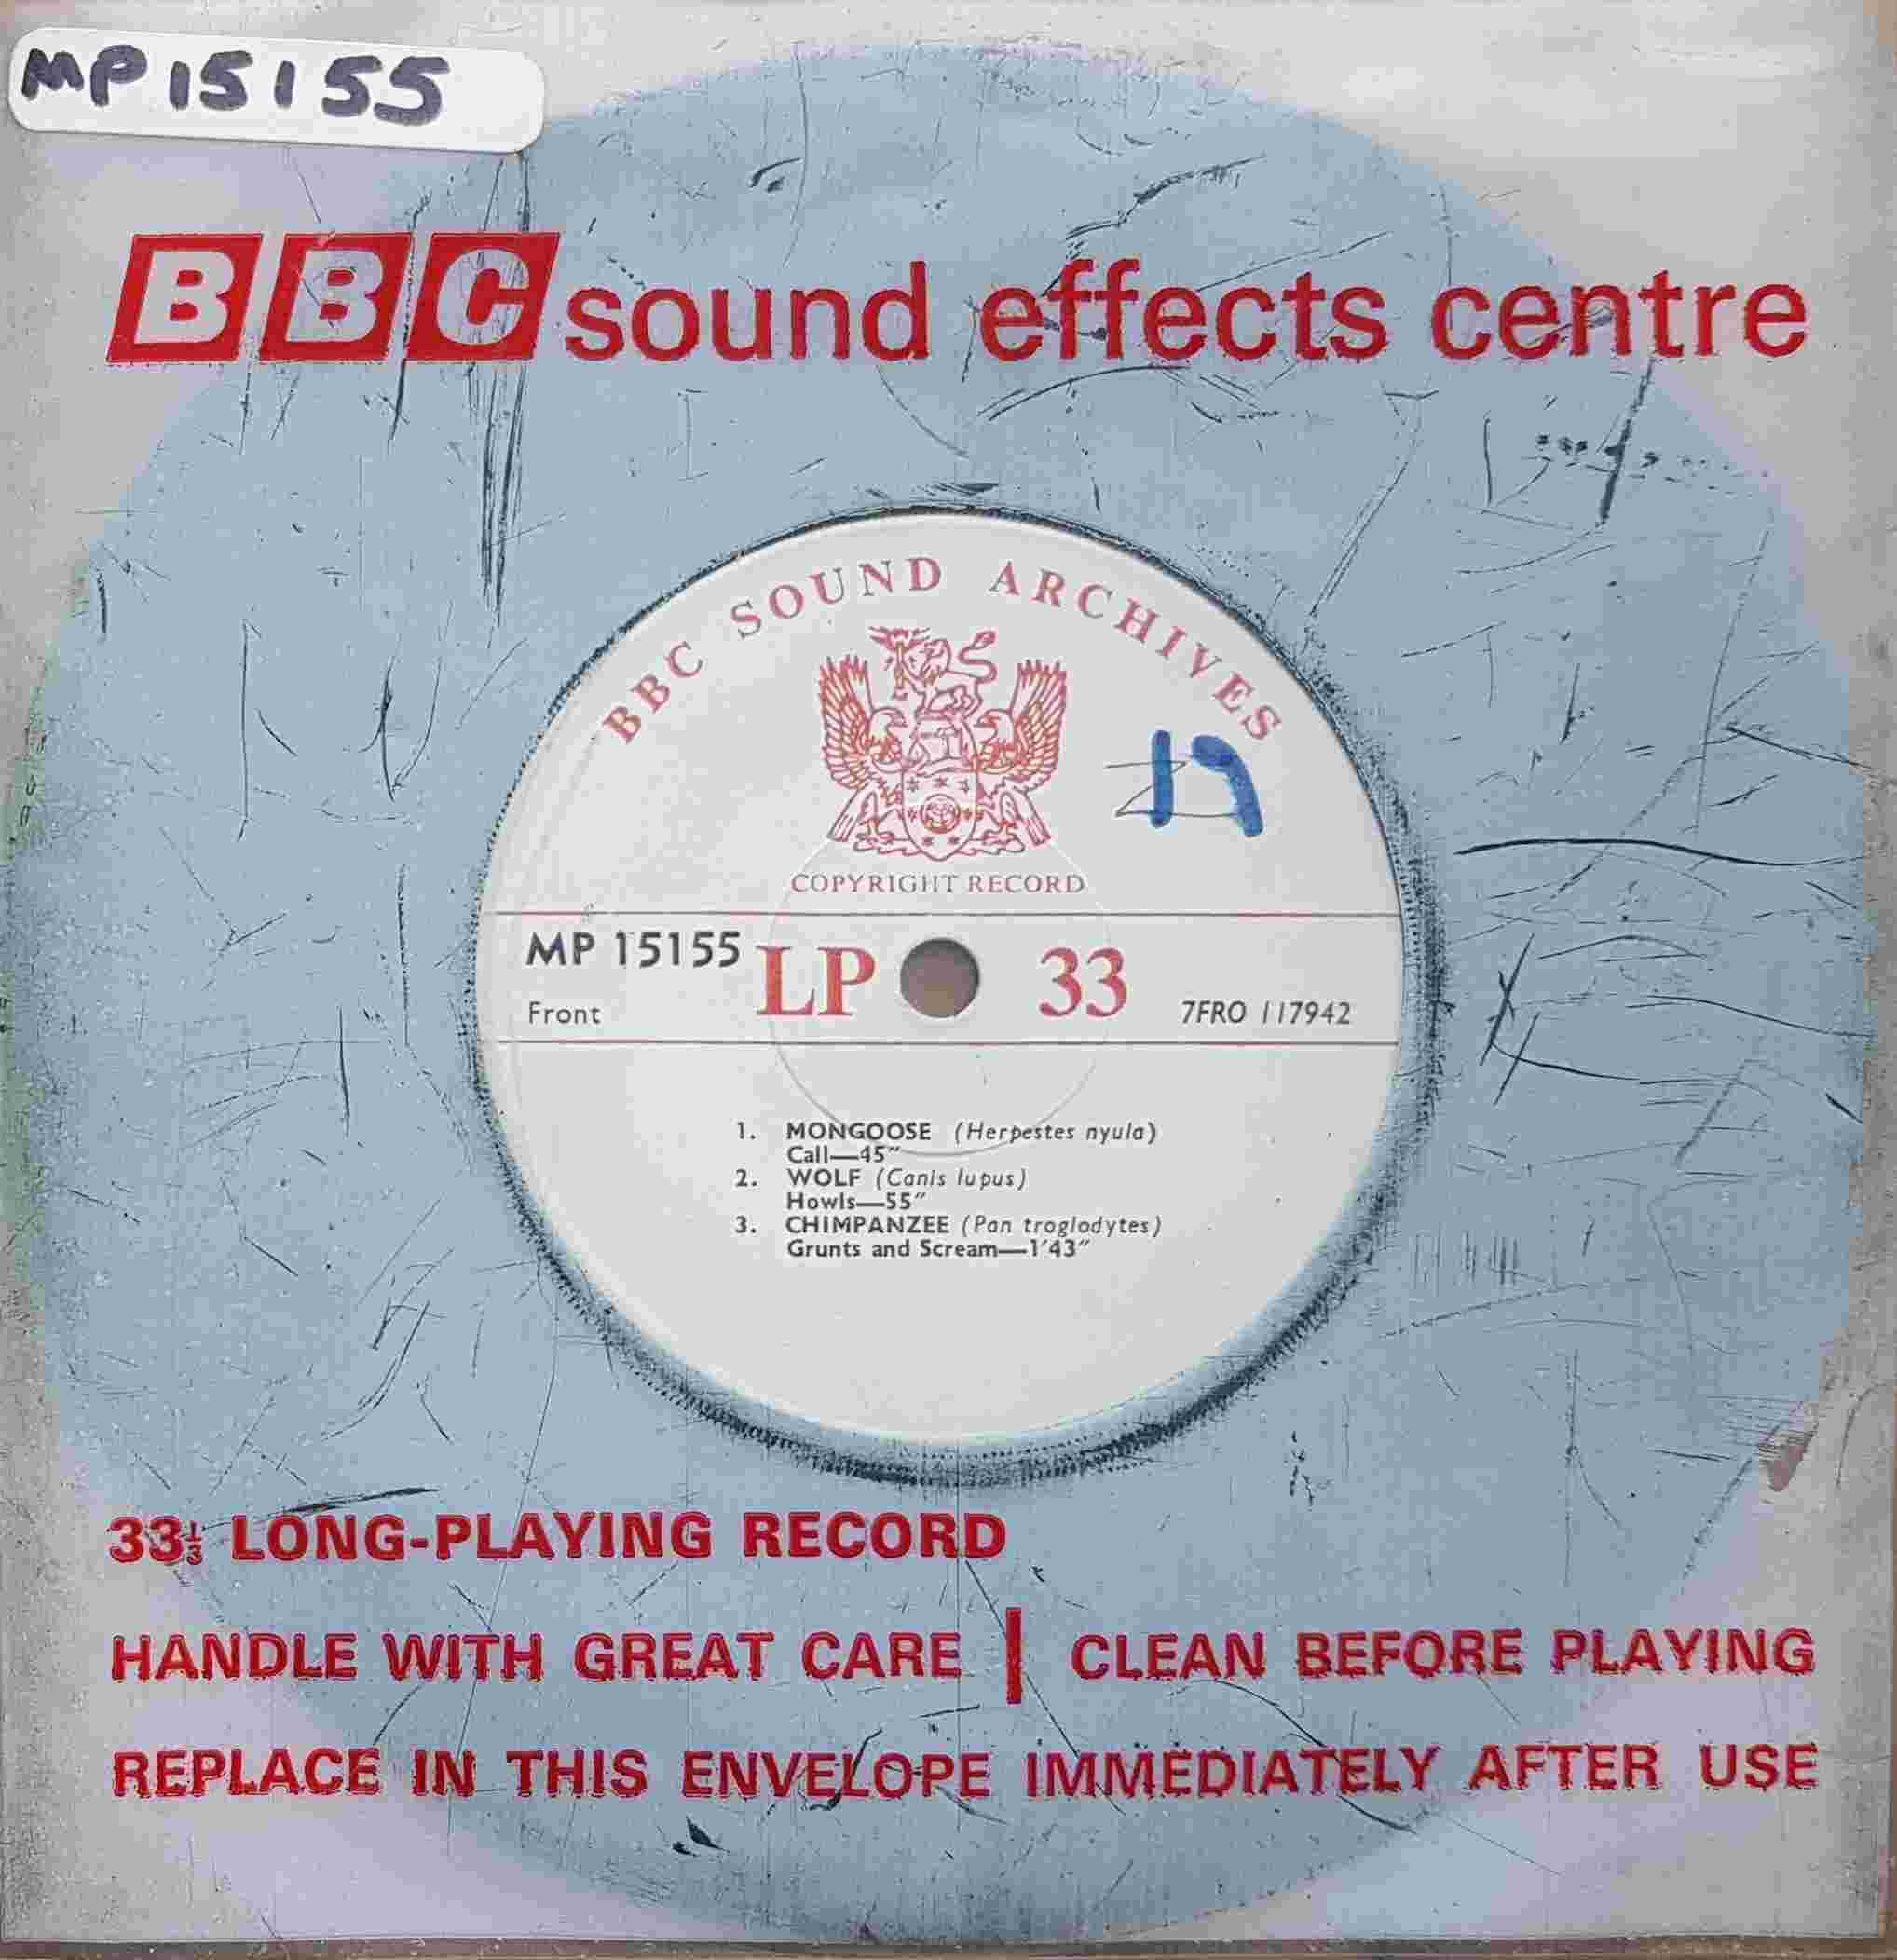 Picture of Animals by artist Not registered from the BBC singles - Records and Tapes library